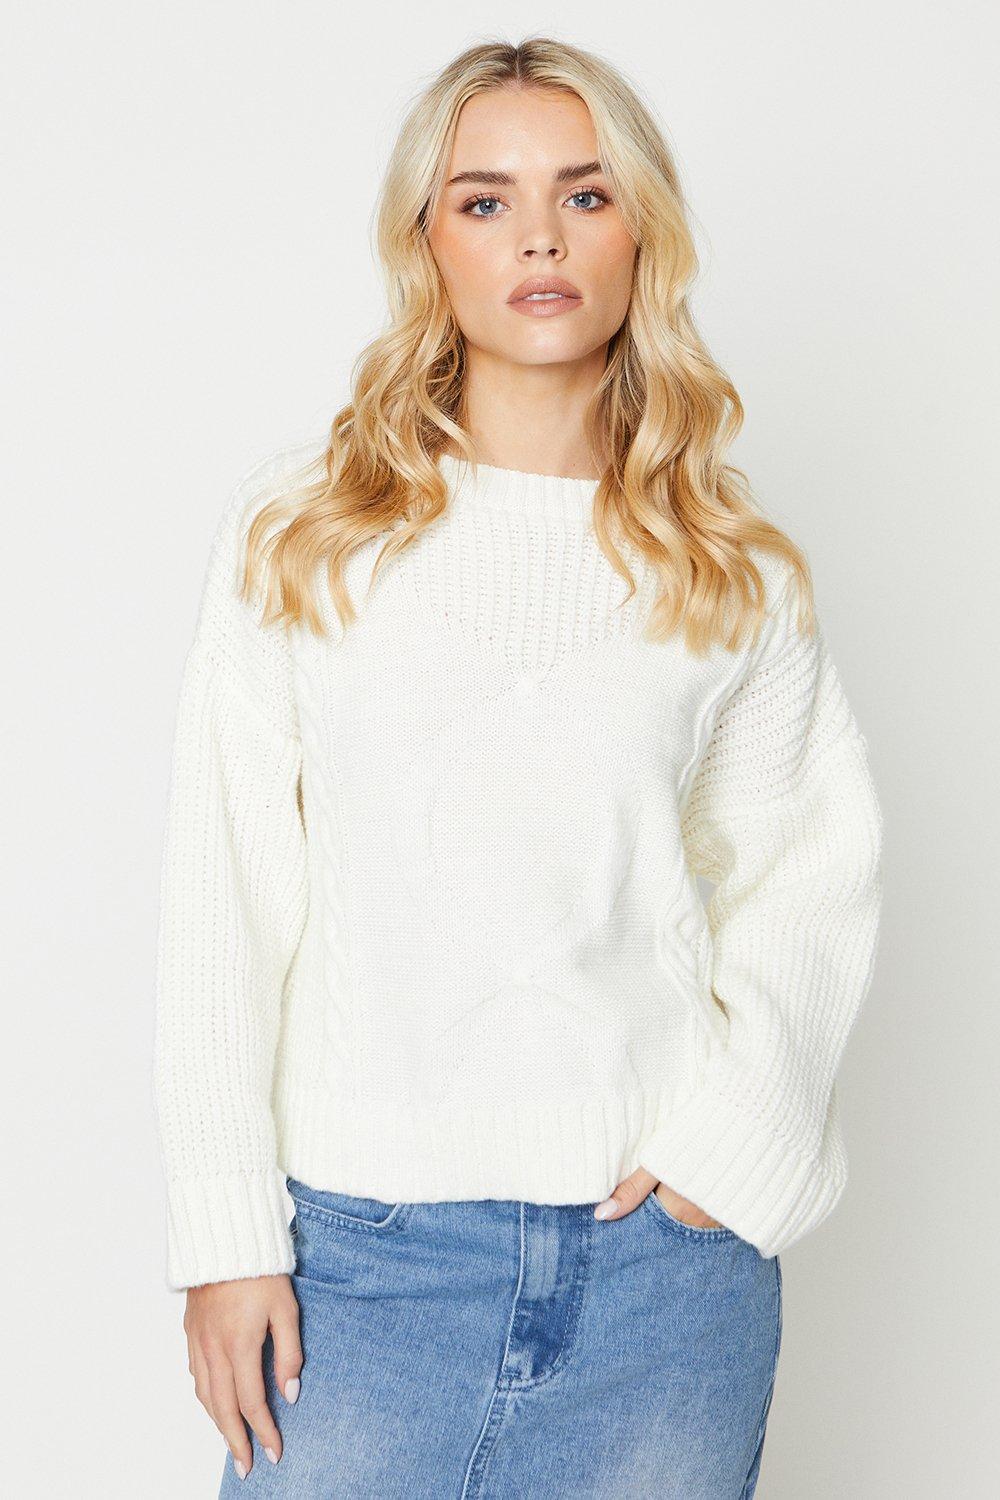 Women’s Petite Wide Sleeve Cable Fluffy Knit Jumper - ivory - L